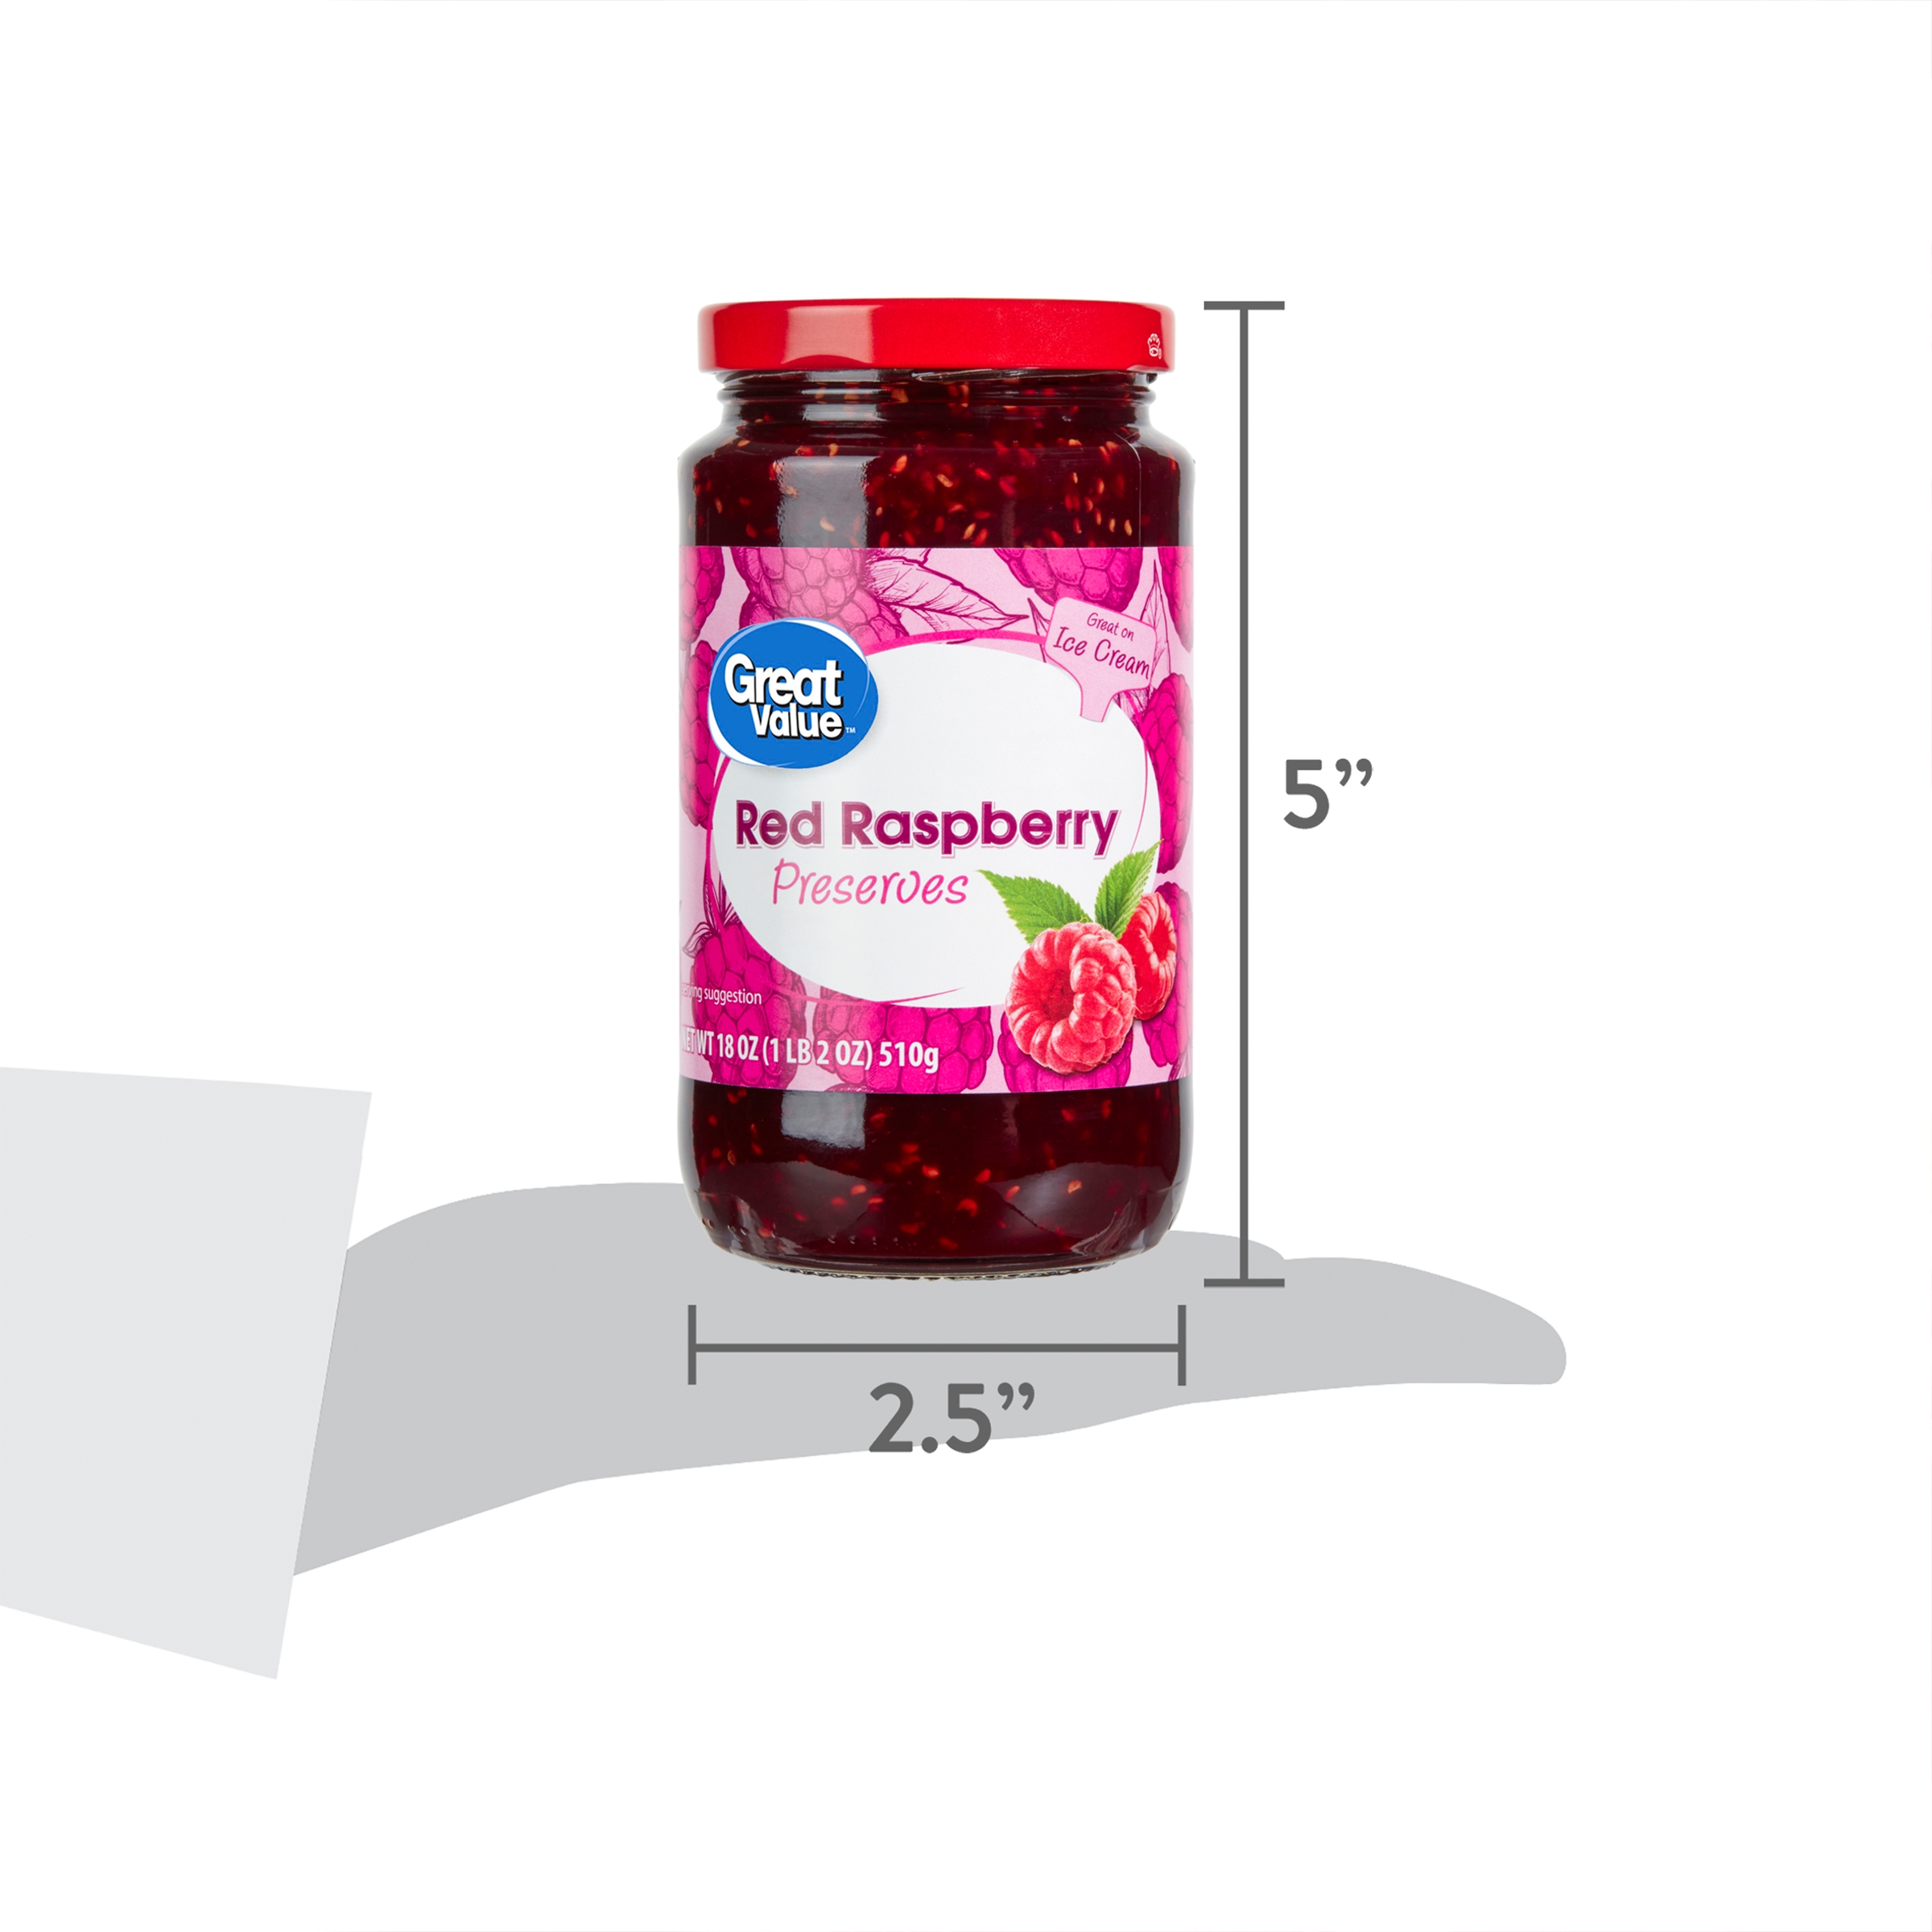 Great Value Red Raspberry Preserves, 18 oz - image 6 of 7